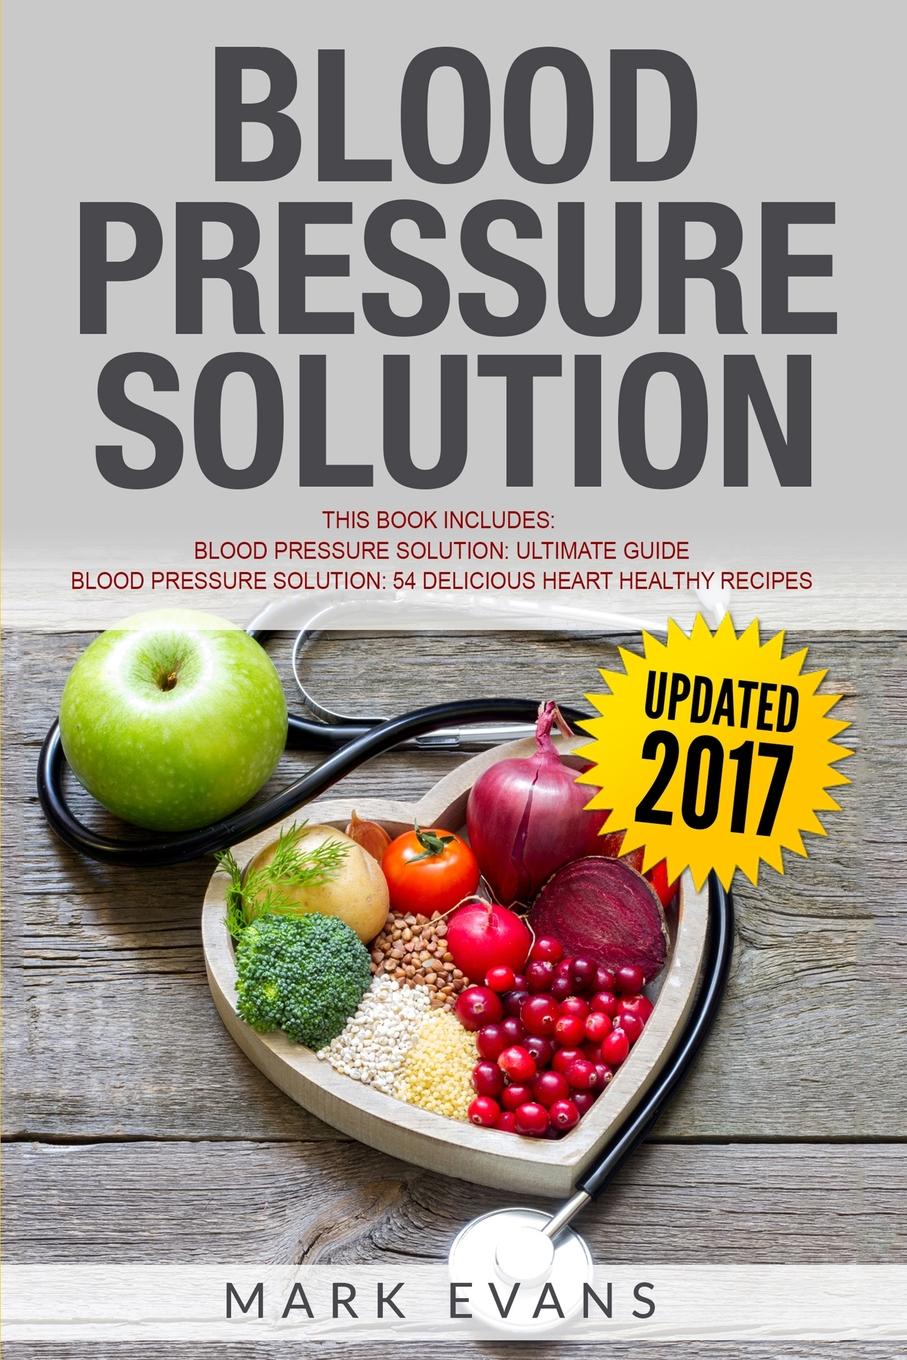 Blood Pressure. Solution - 2 Manuscripts - The Ultimate Guide to Naturally Lowering High Blood Pressure and Reducing Hypertension & 54 Delicious Heart Healthy Recipes (Blood Pressure Series Book 3)